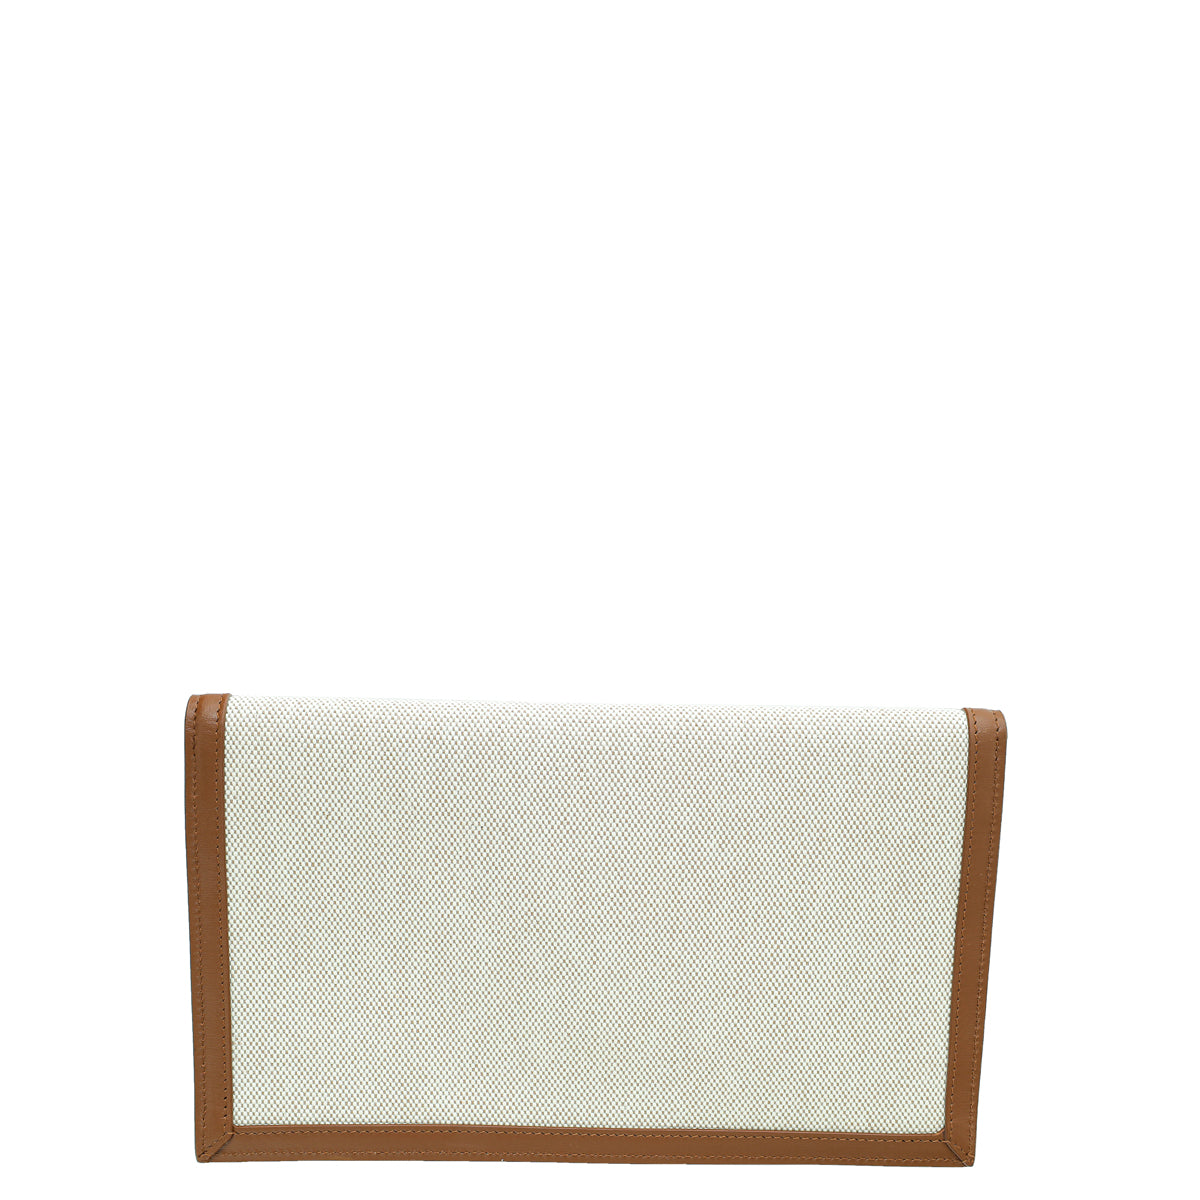 YSL Bicolor Uptown Pouch